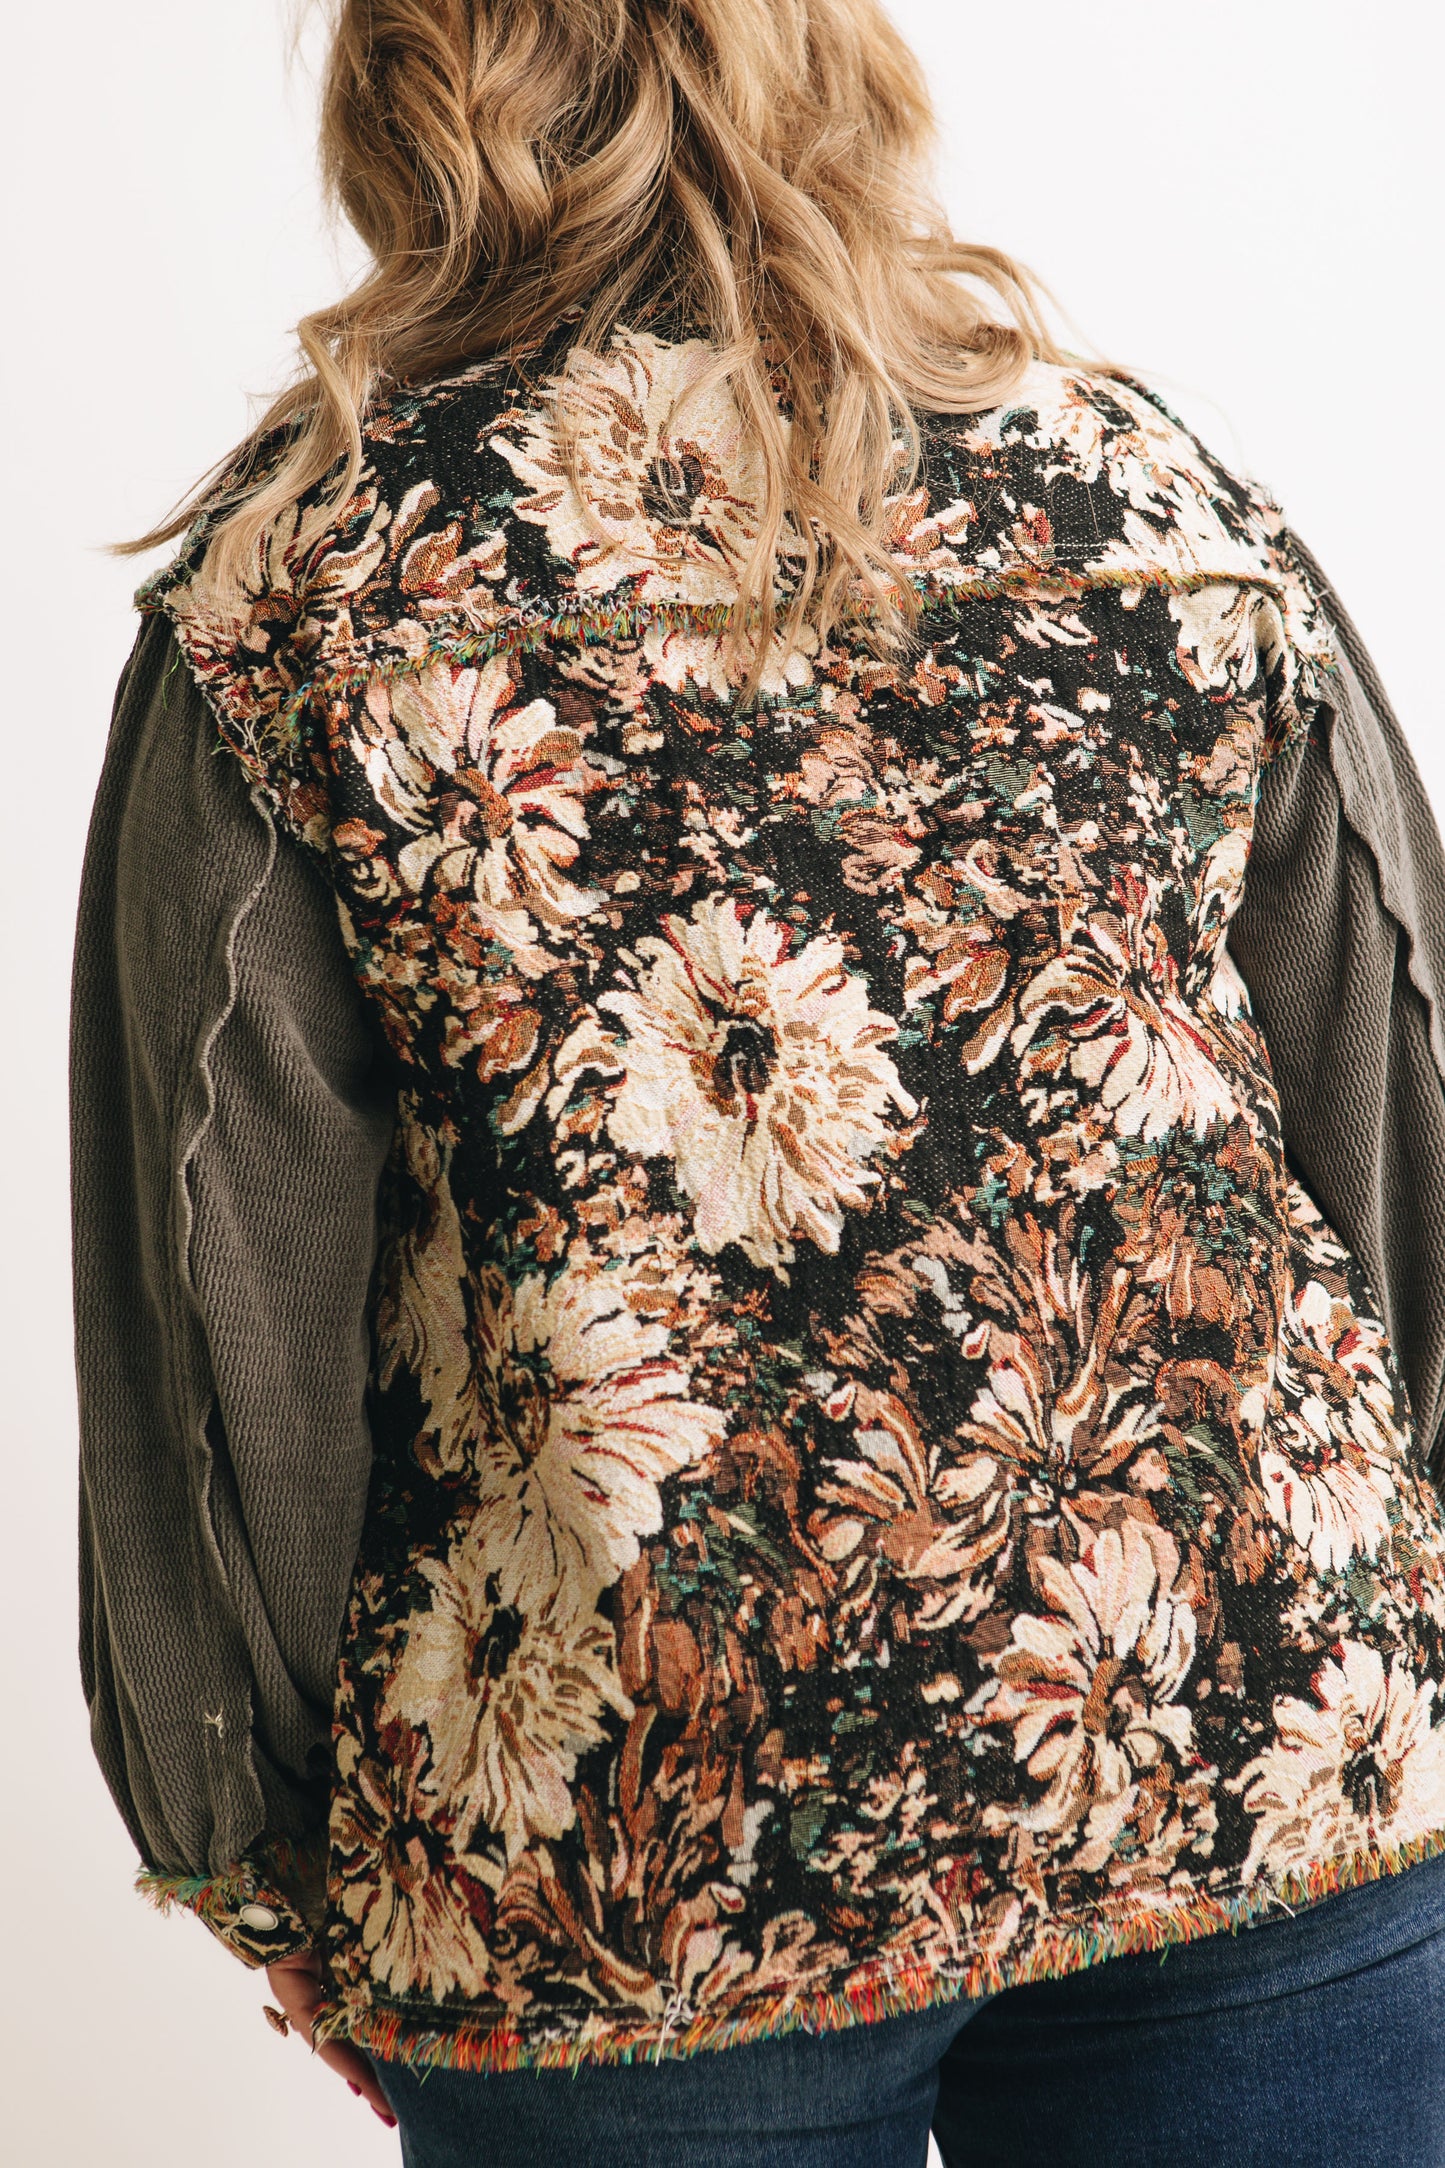 Artistry In Florals - Woven Floral Mix Jacket (S-L)